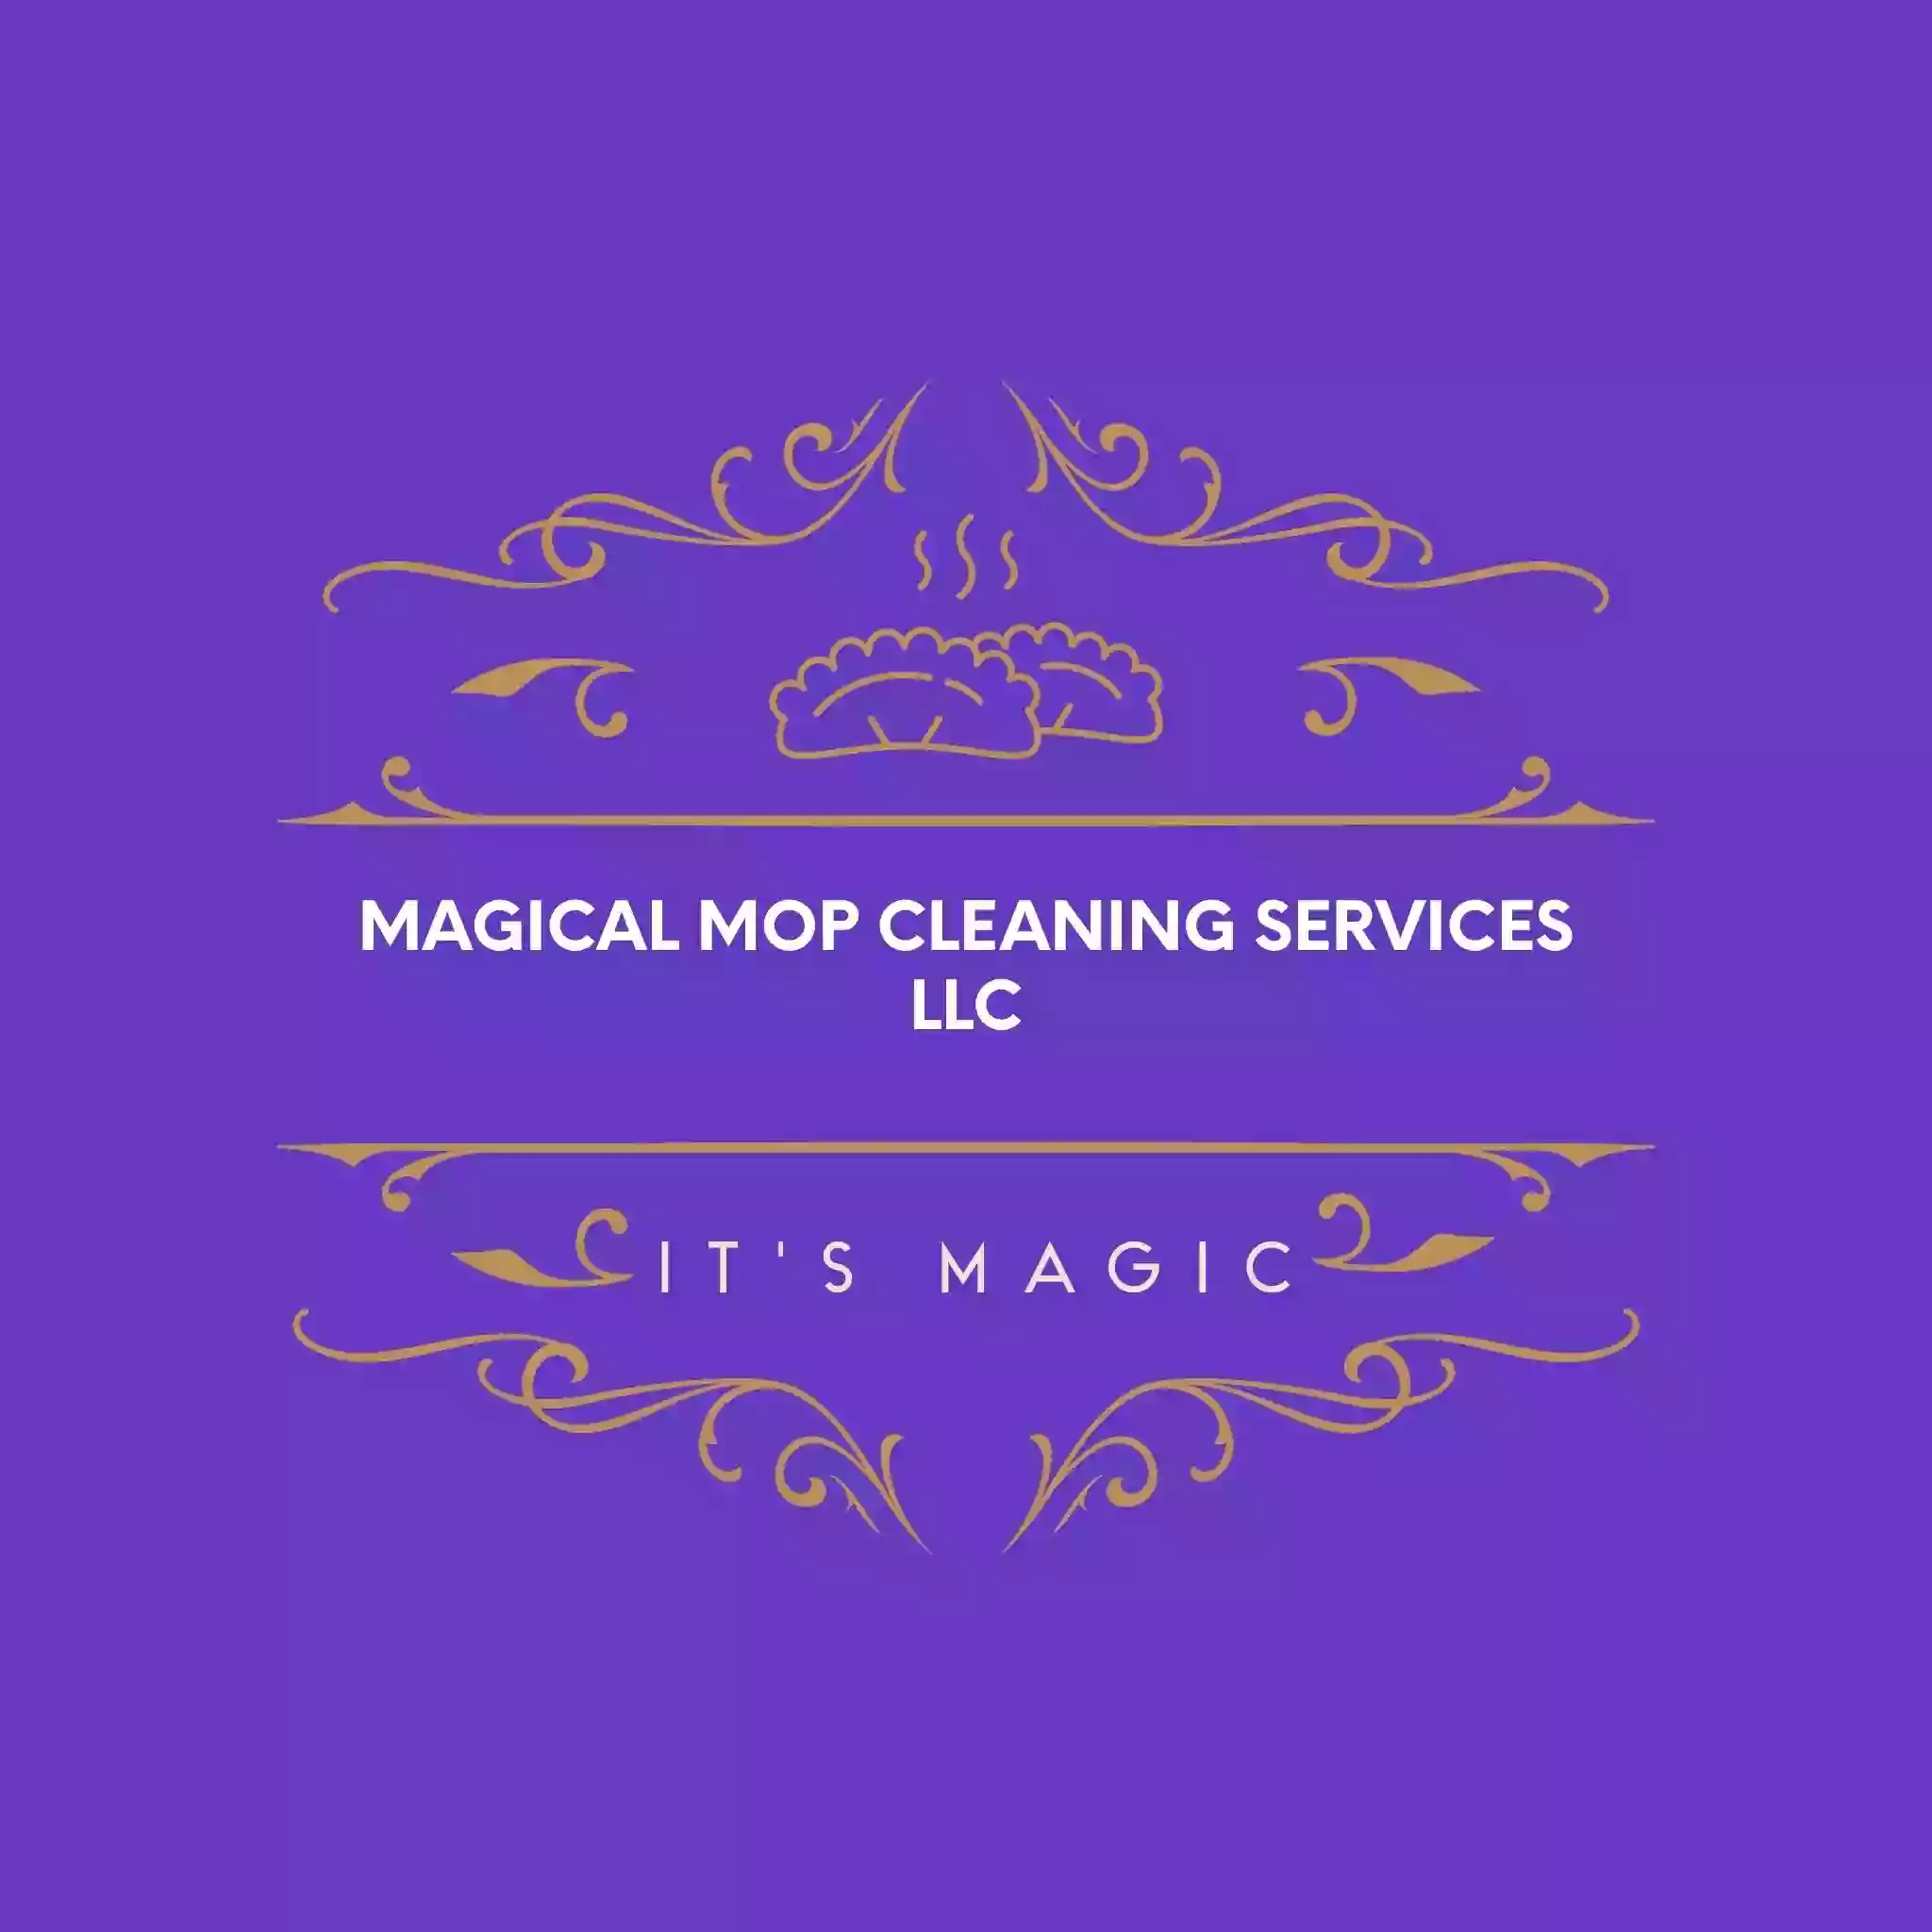 Magical Mop Cleaning Services LLC